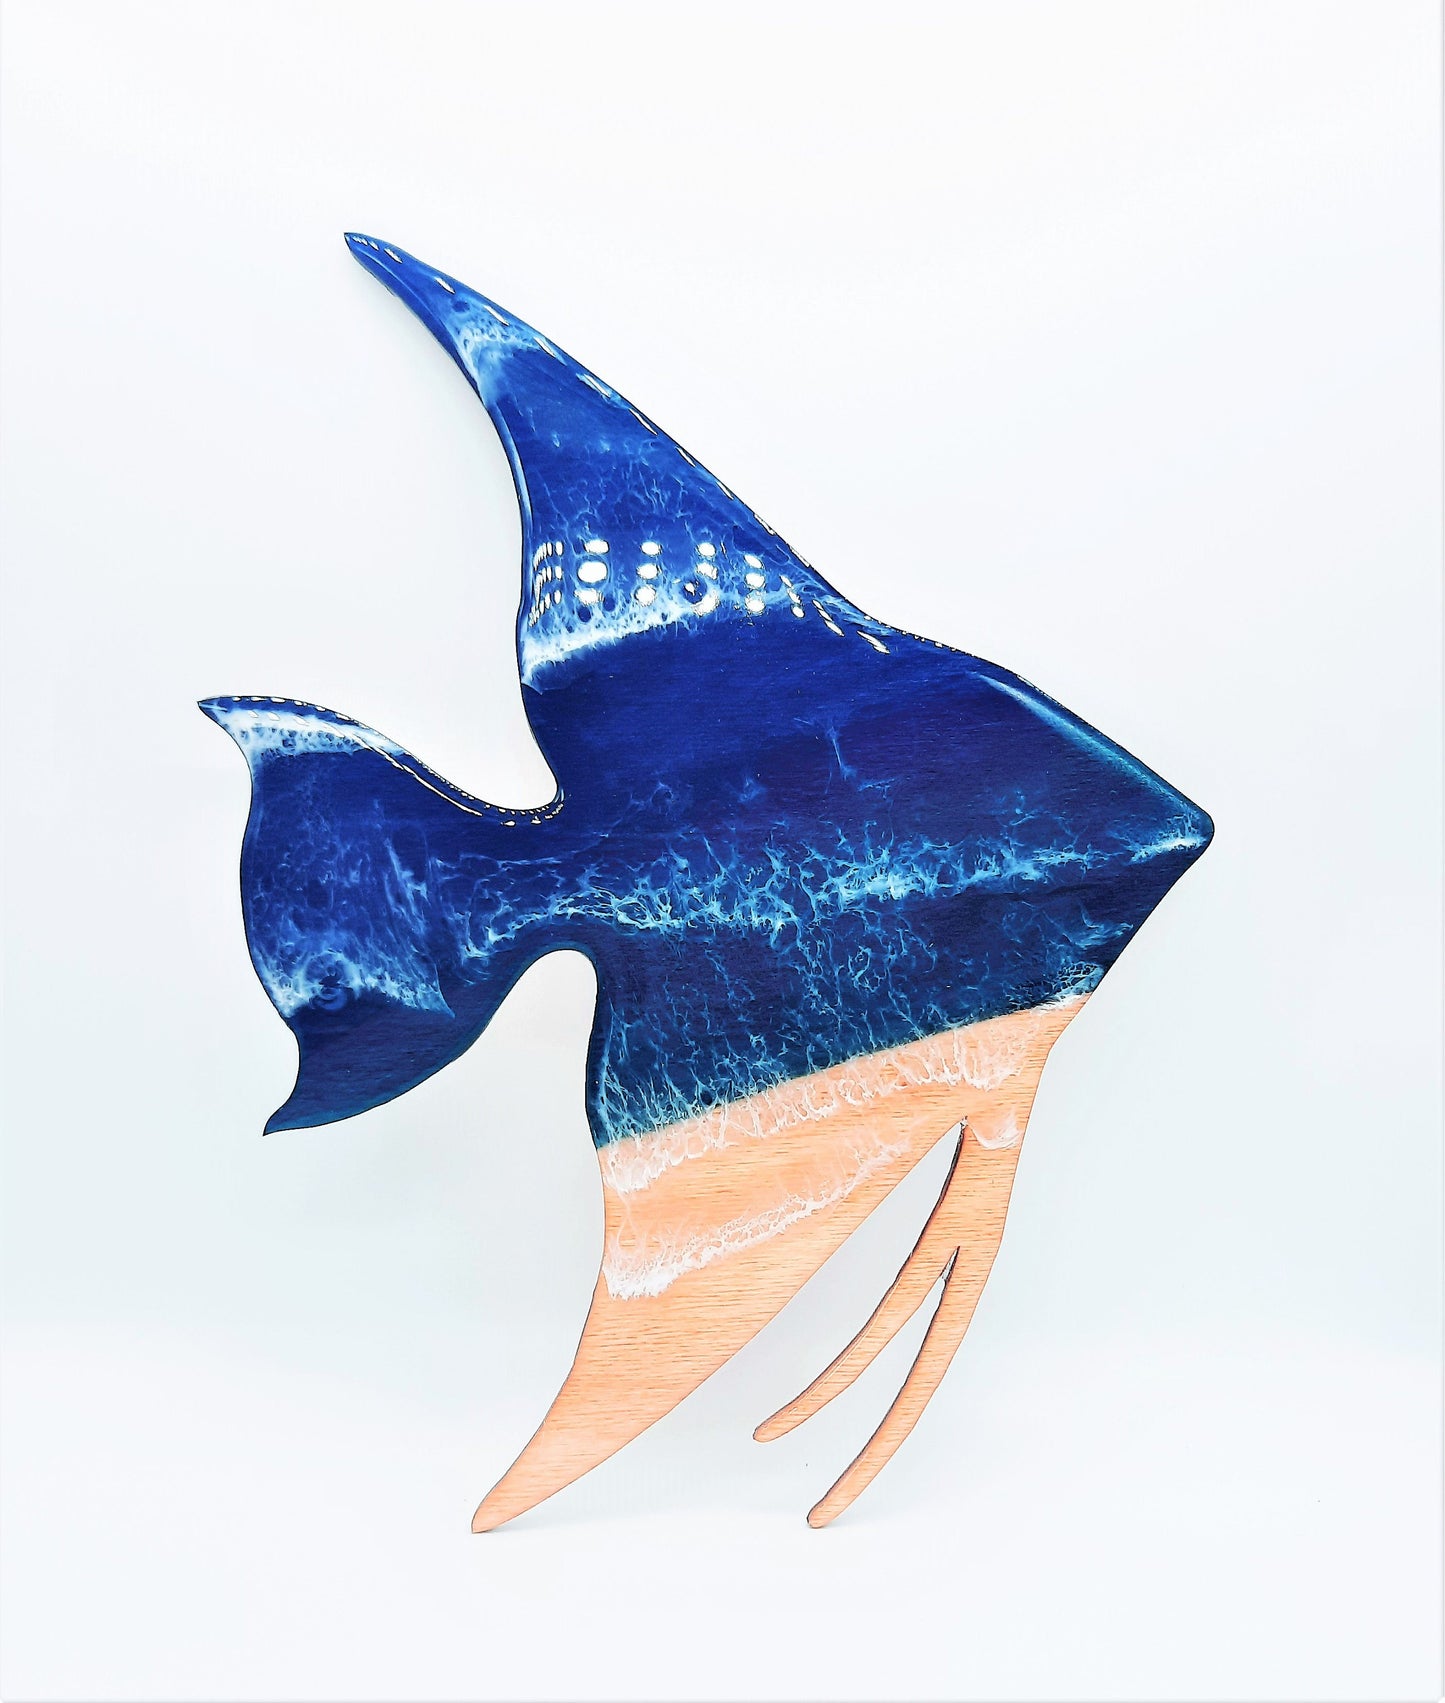 10" Handpainted Angel Fish - Eco-Friendly Resin Seascape Coastal Beach Scene, Blue & Teal, Deep Contrast Waves, With or Without Real Sand